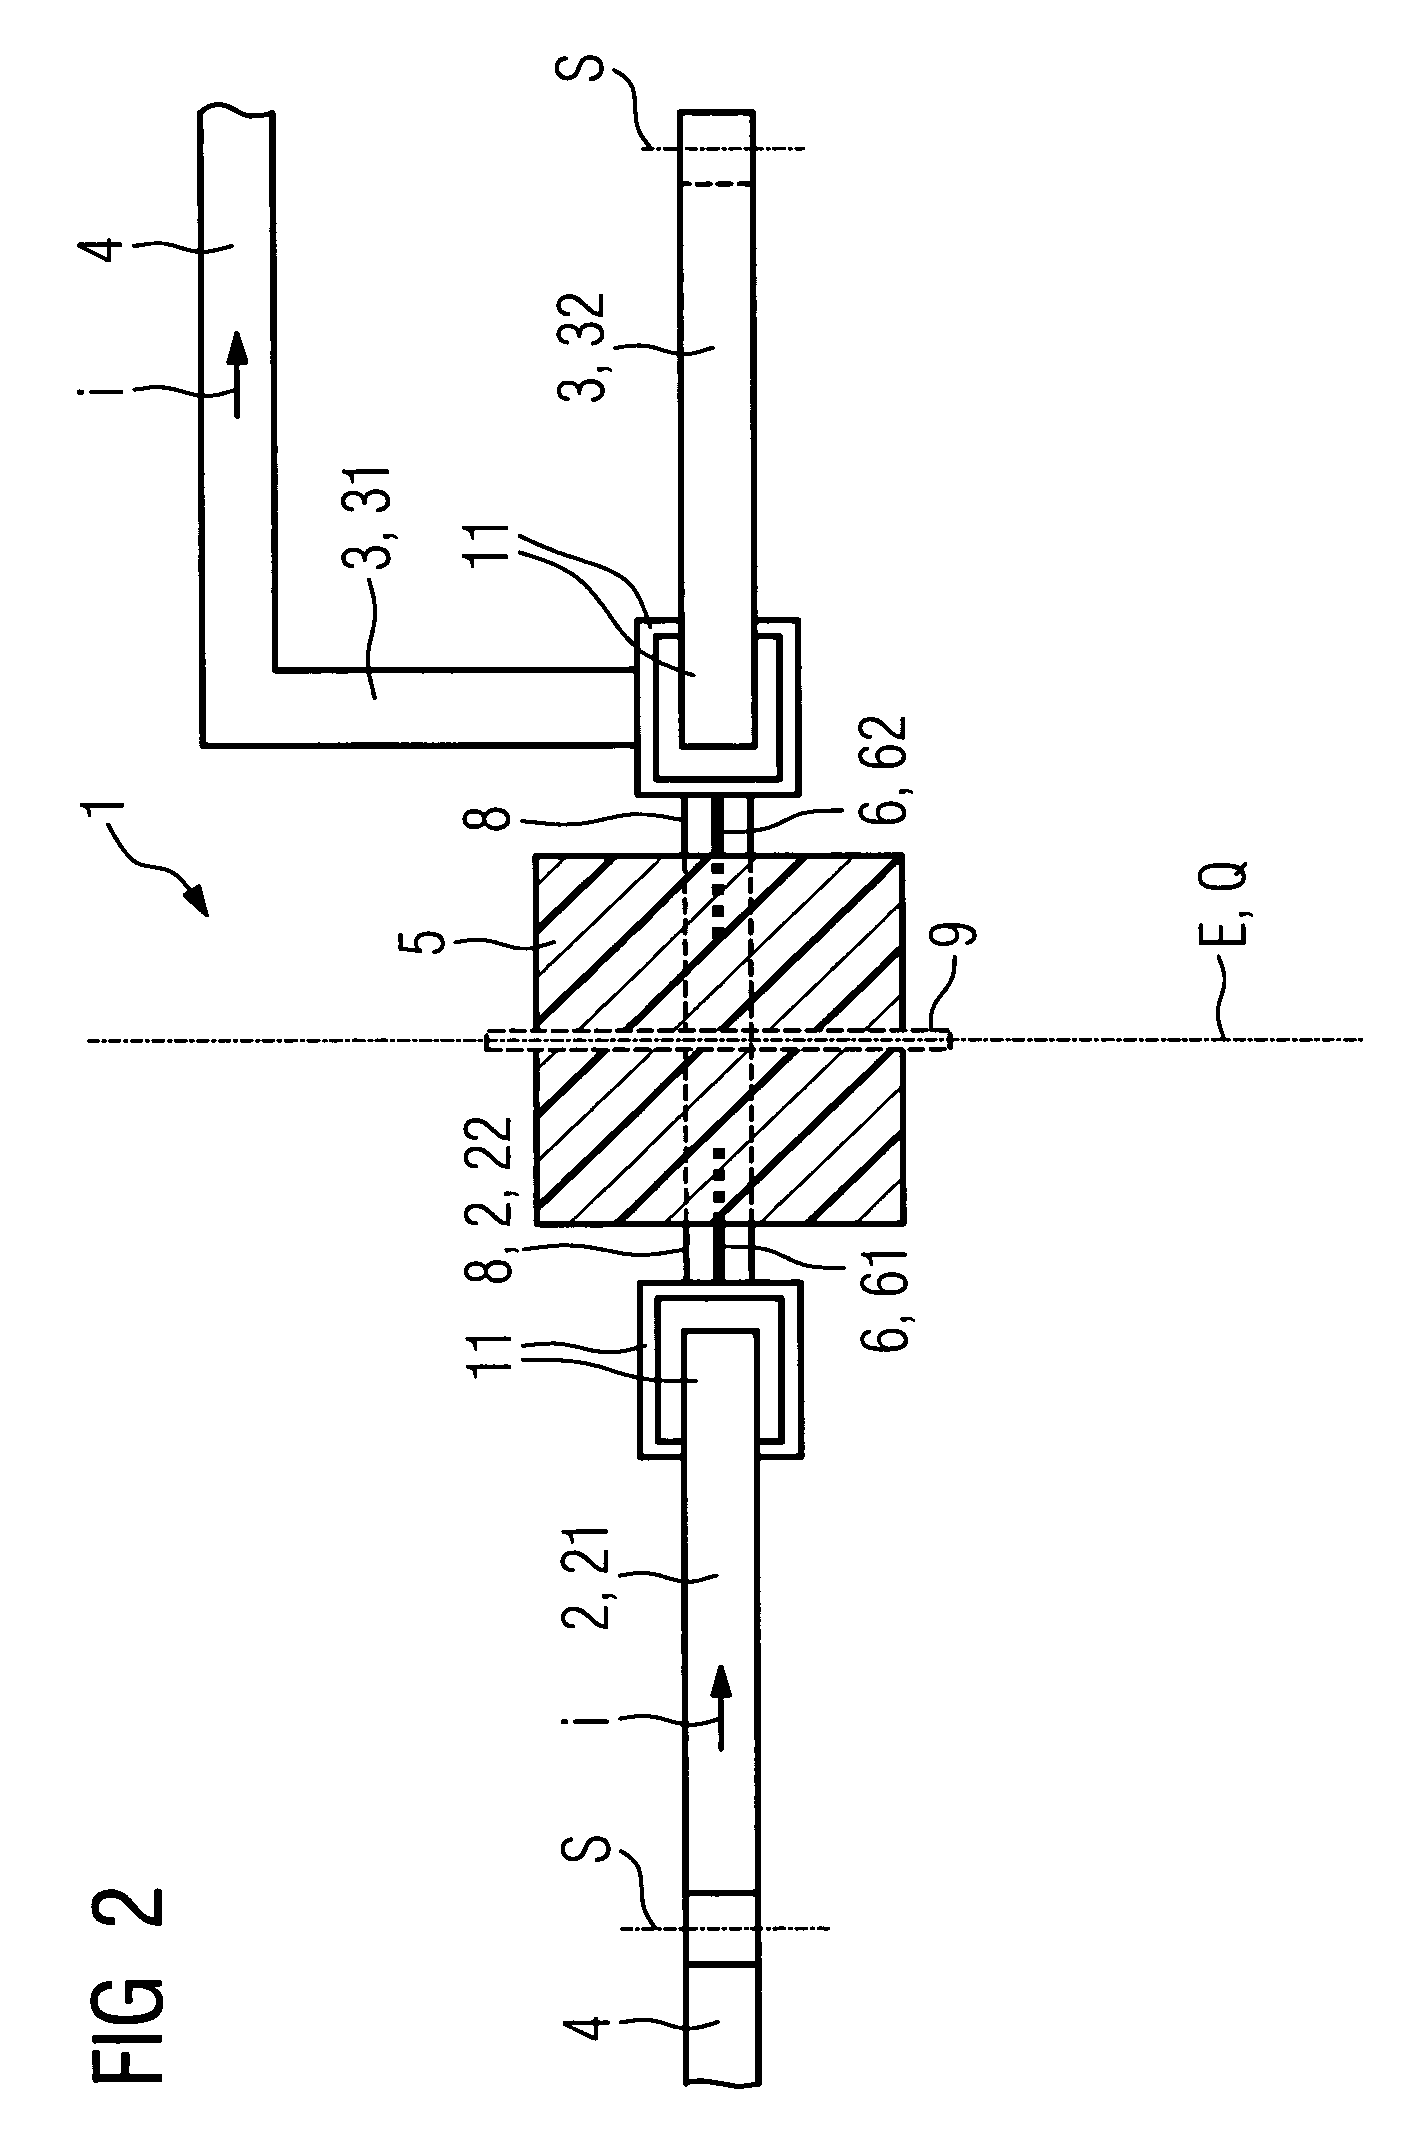 Switching device, in particular a power switching device, having two pairs of series-connected switching contacts for interrupting a conducting path